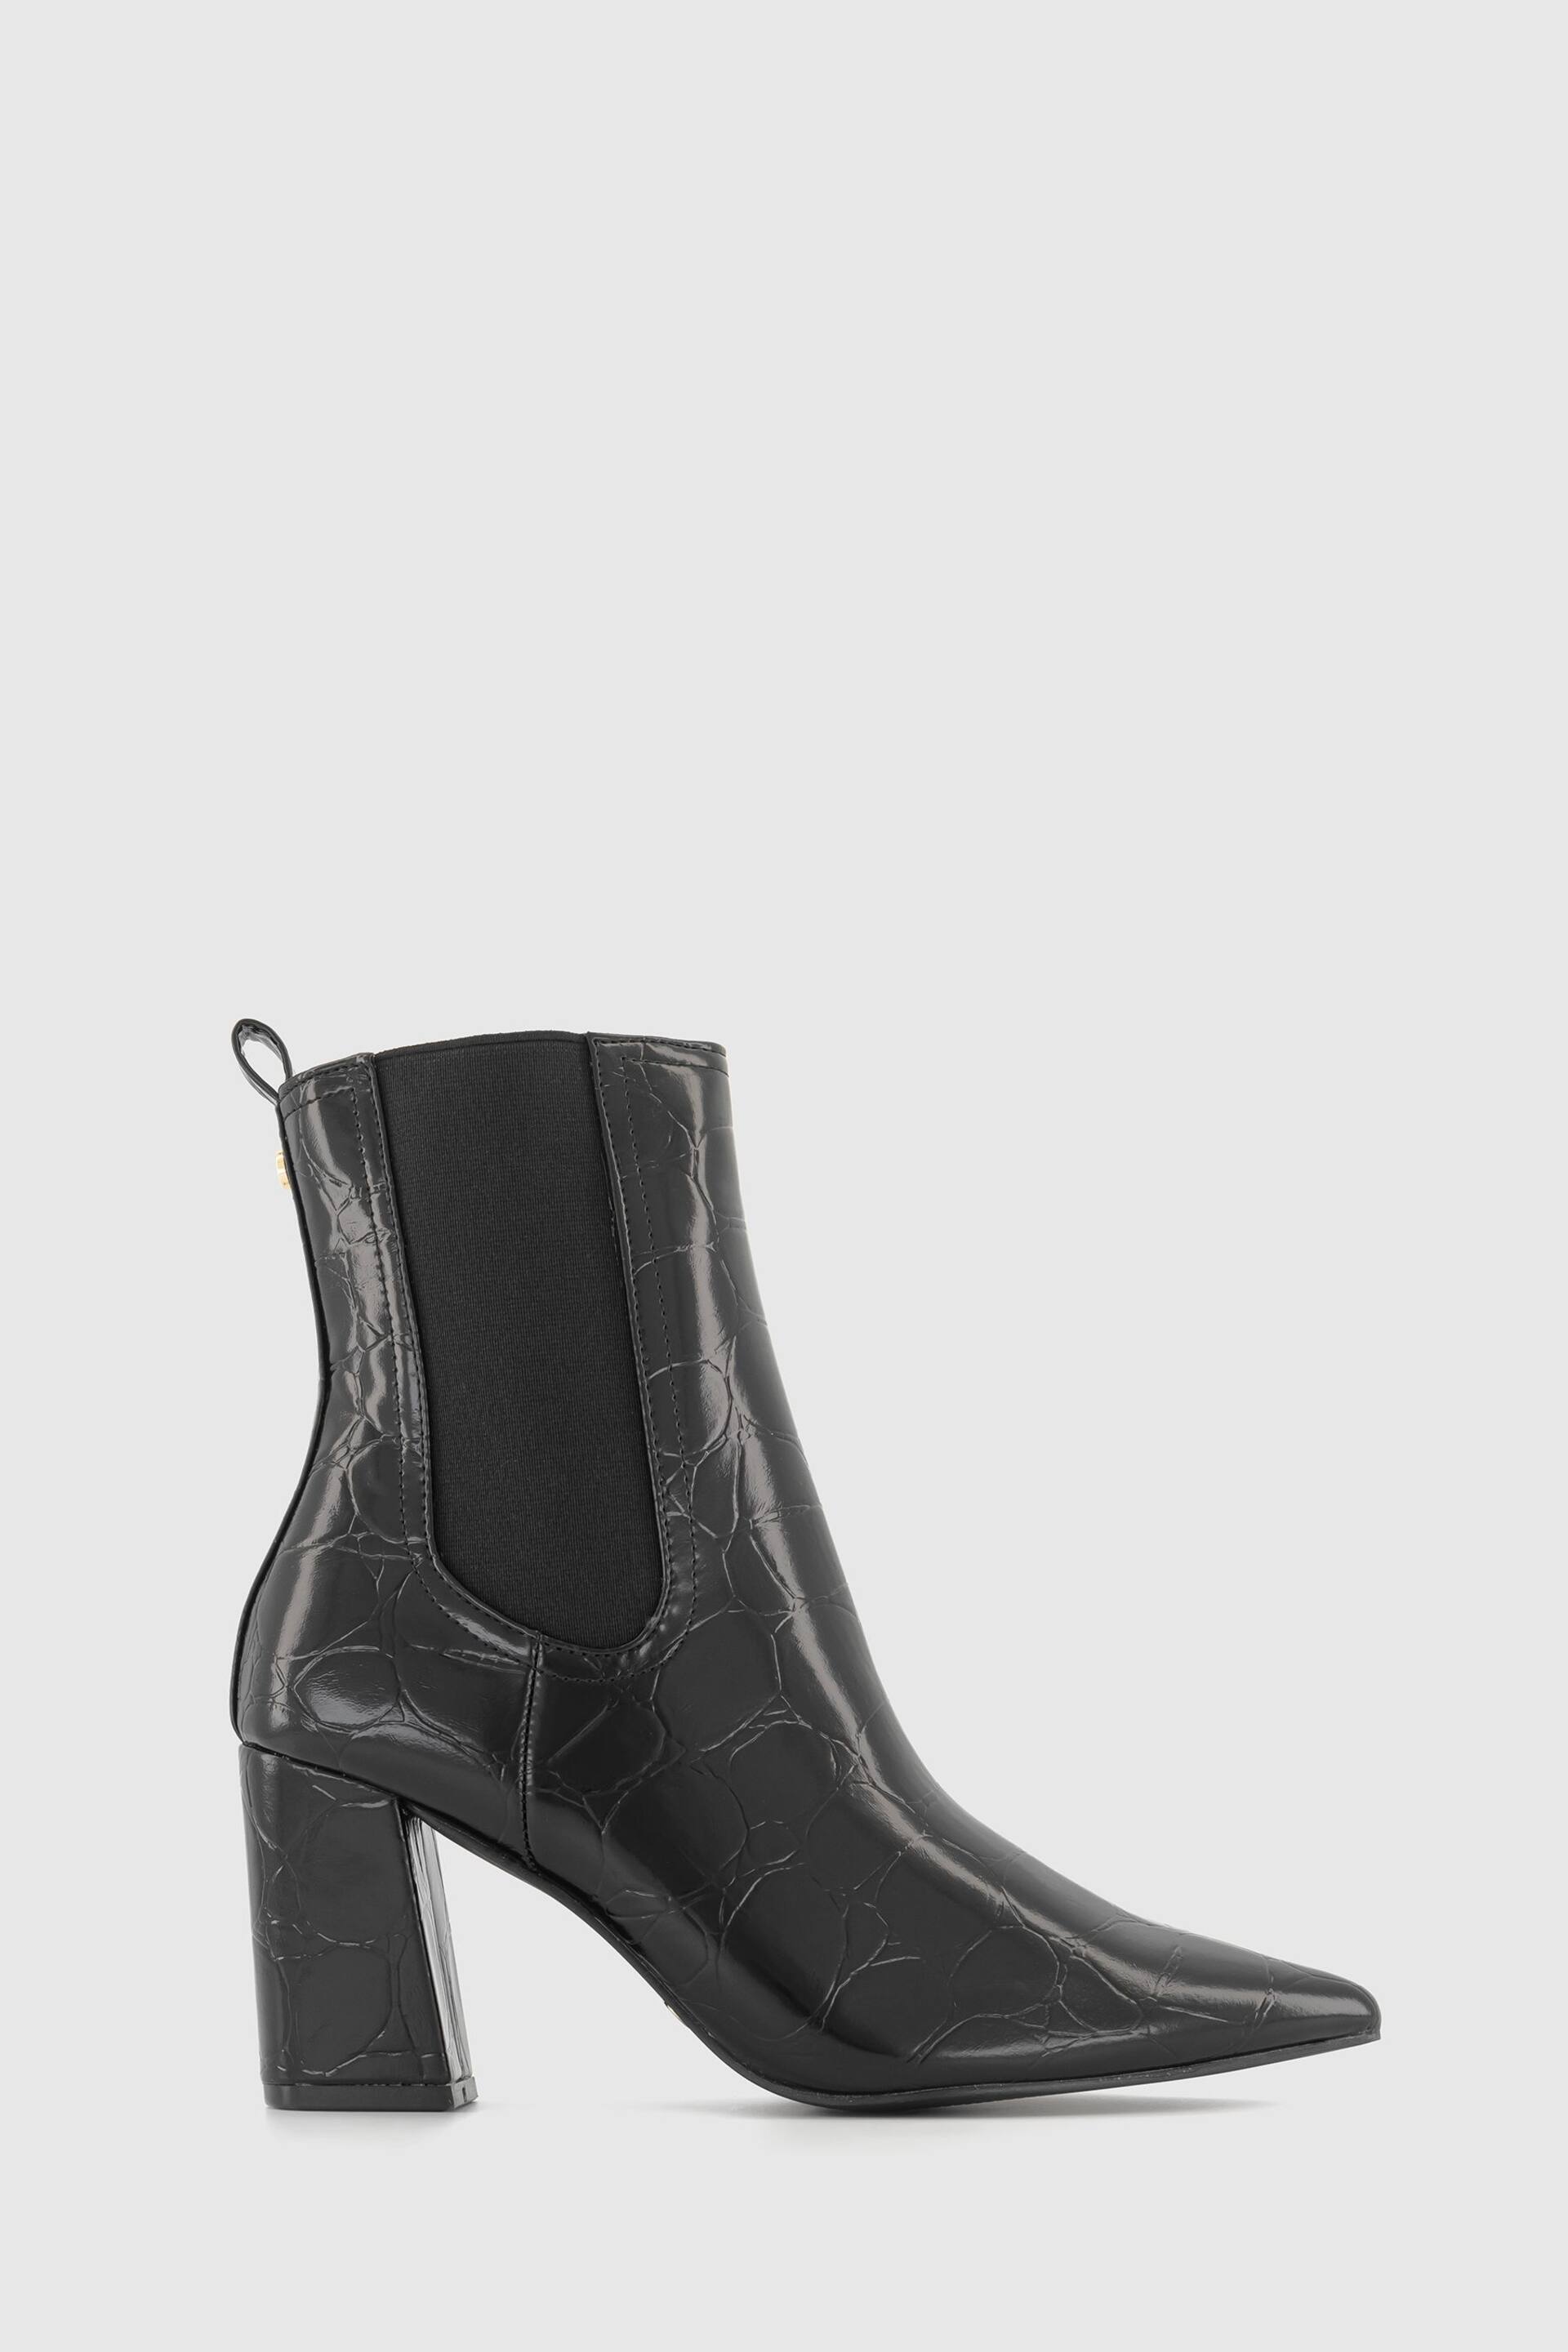 Office Black Patent Croc Effect Chelsea  Ankle Boots - Image 1 of 4